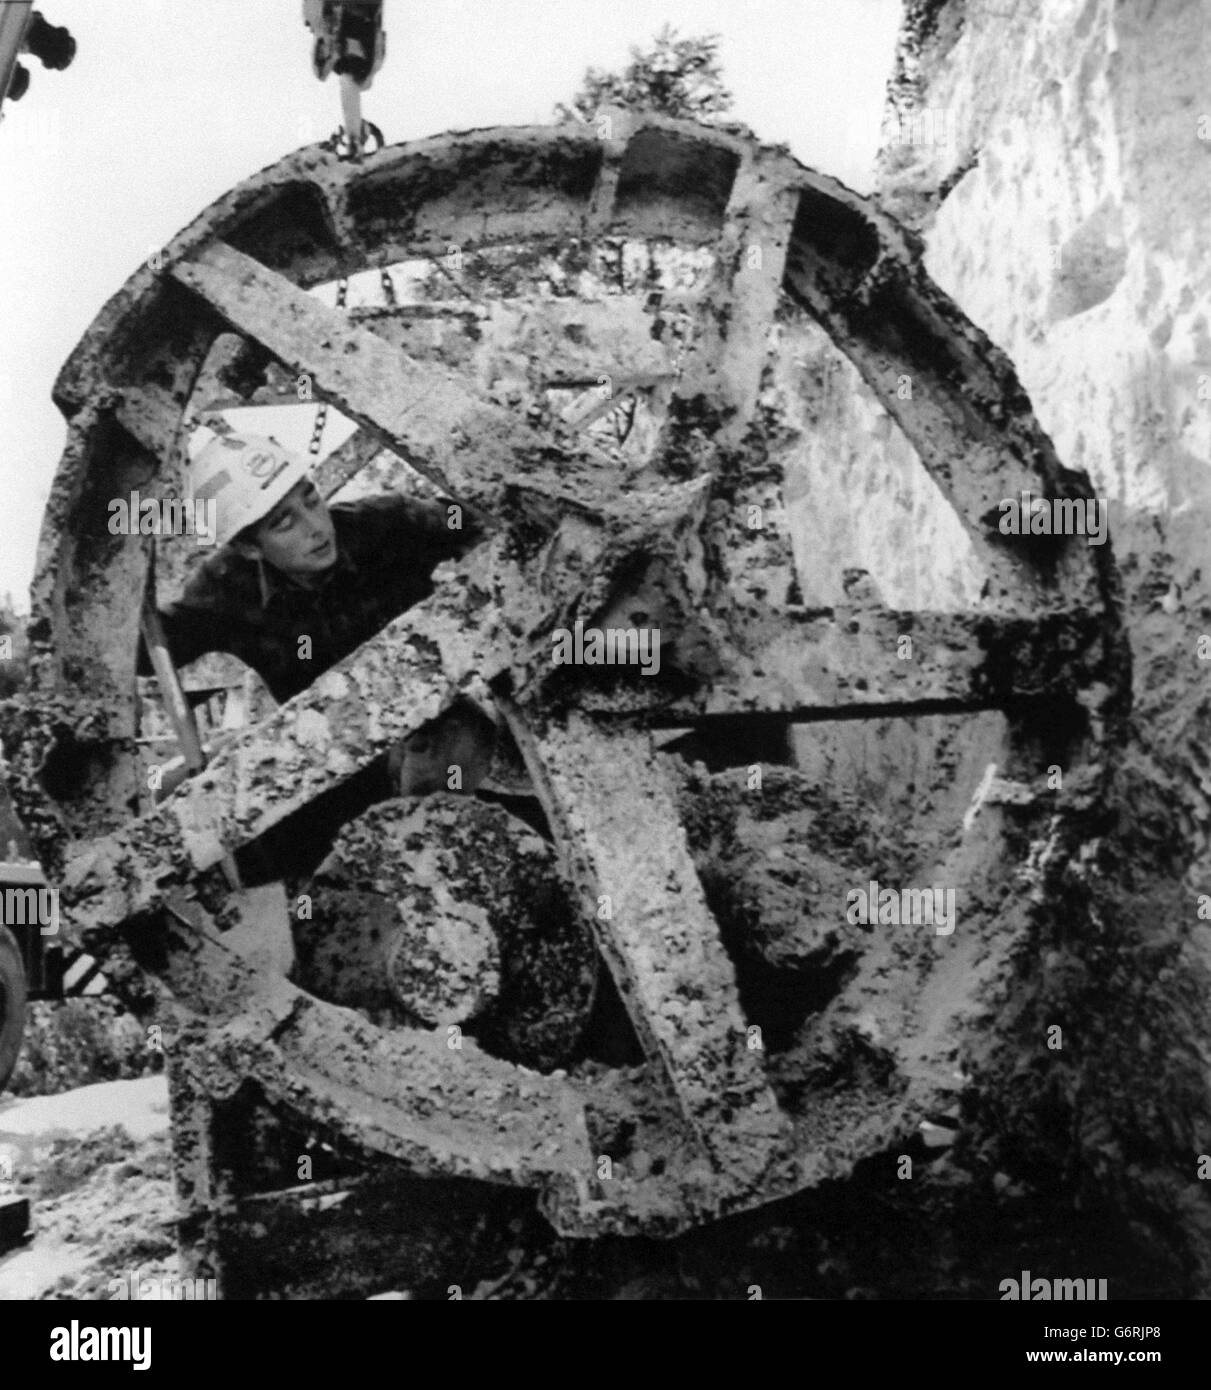 A Eurotunnel engineer inspecting a Whitaker tunnelling boring machine, which was unearthed at Hythe, Kent. The machine was used in a project in 1922-23 to dig an exploratory tunnel, which was later abandoned that year and has remained in the tunnel ever since until Eurotunnel excavated it. Stock Photo